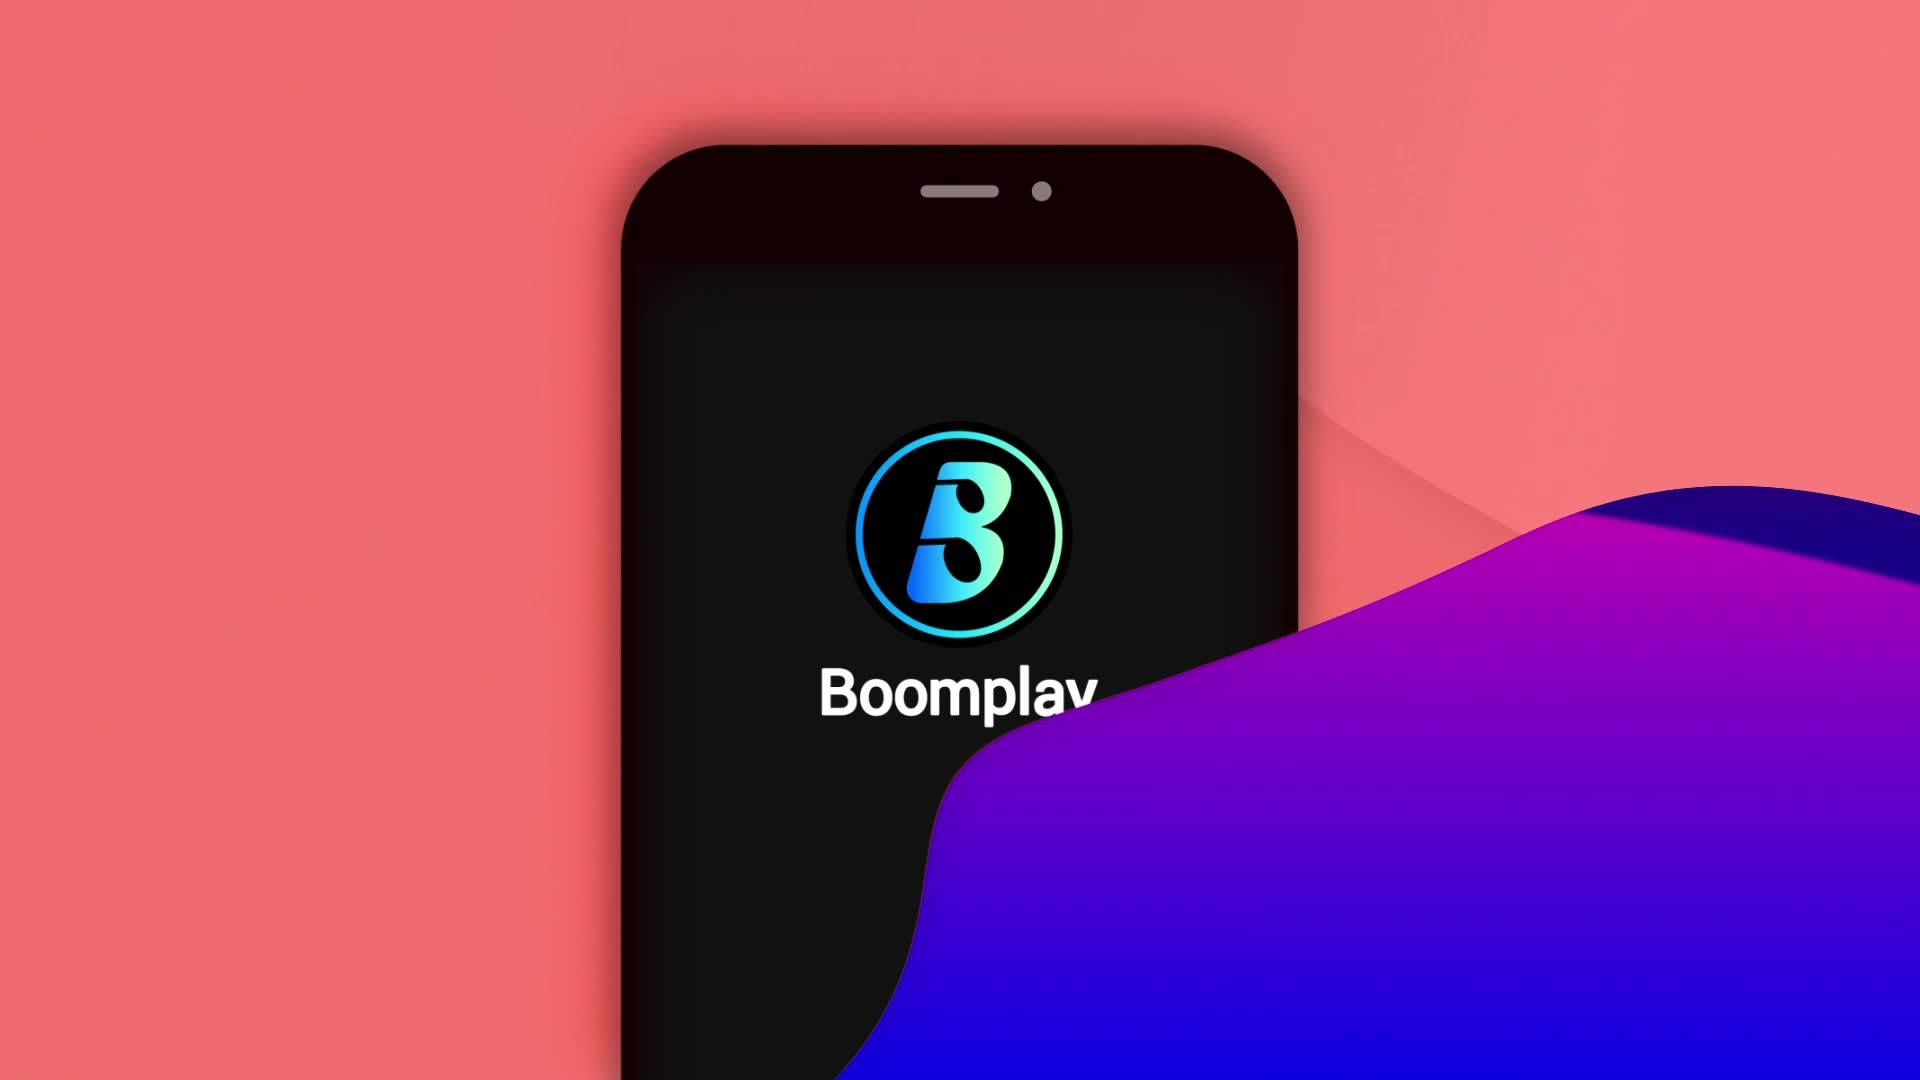 African music accounts for 70% of streams on Boomplay service